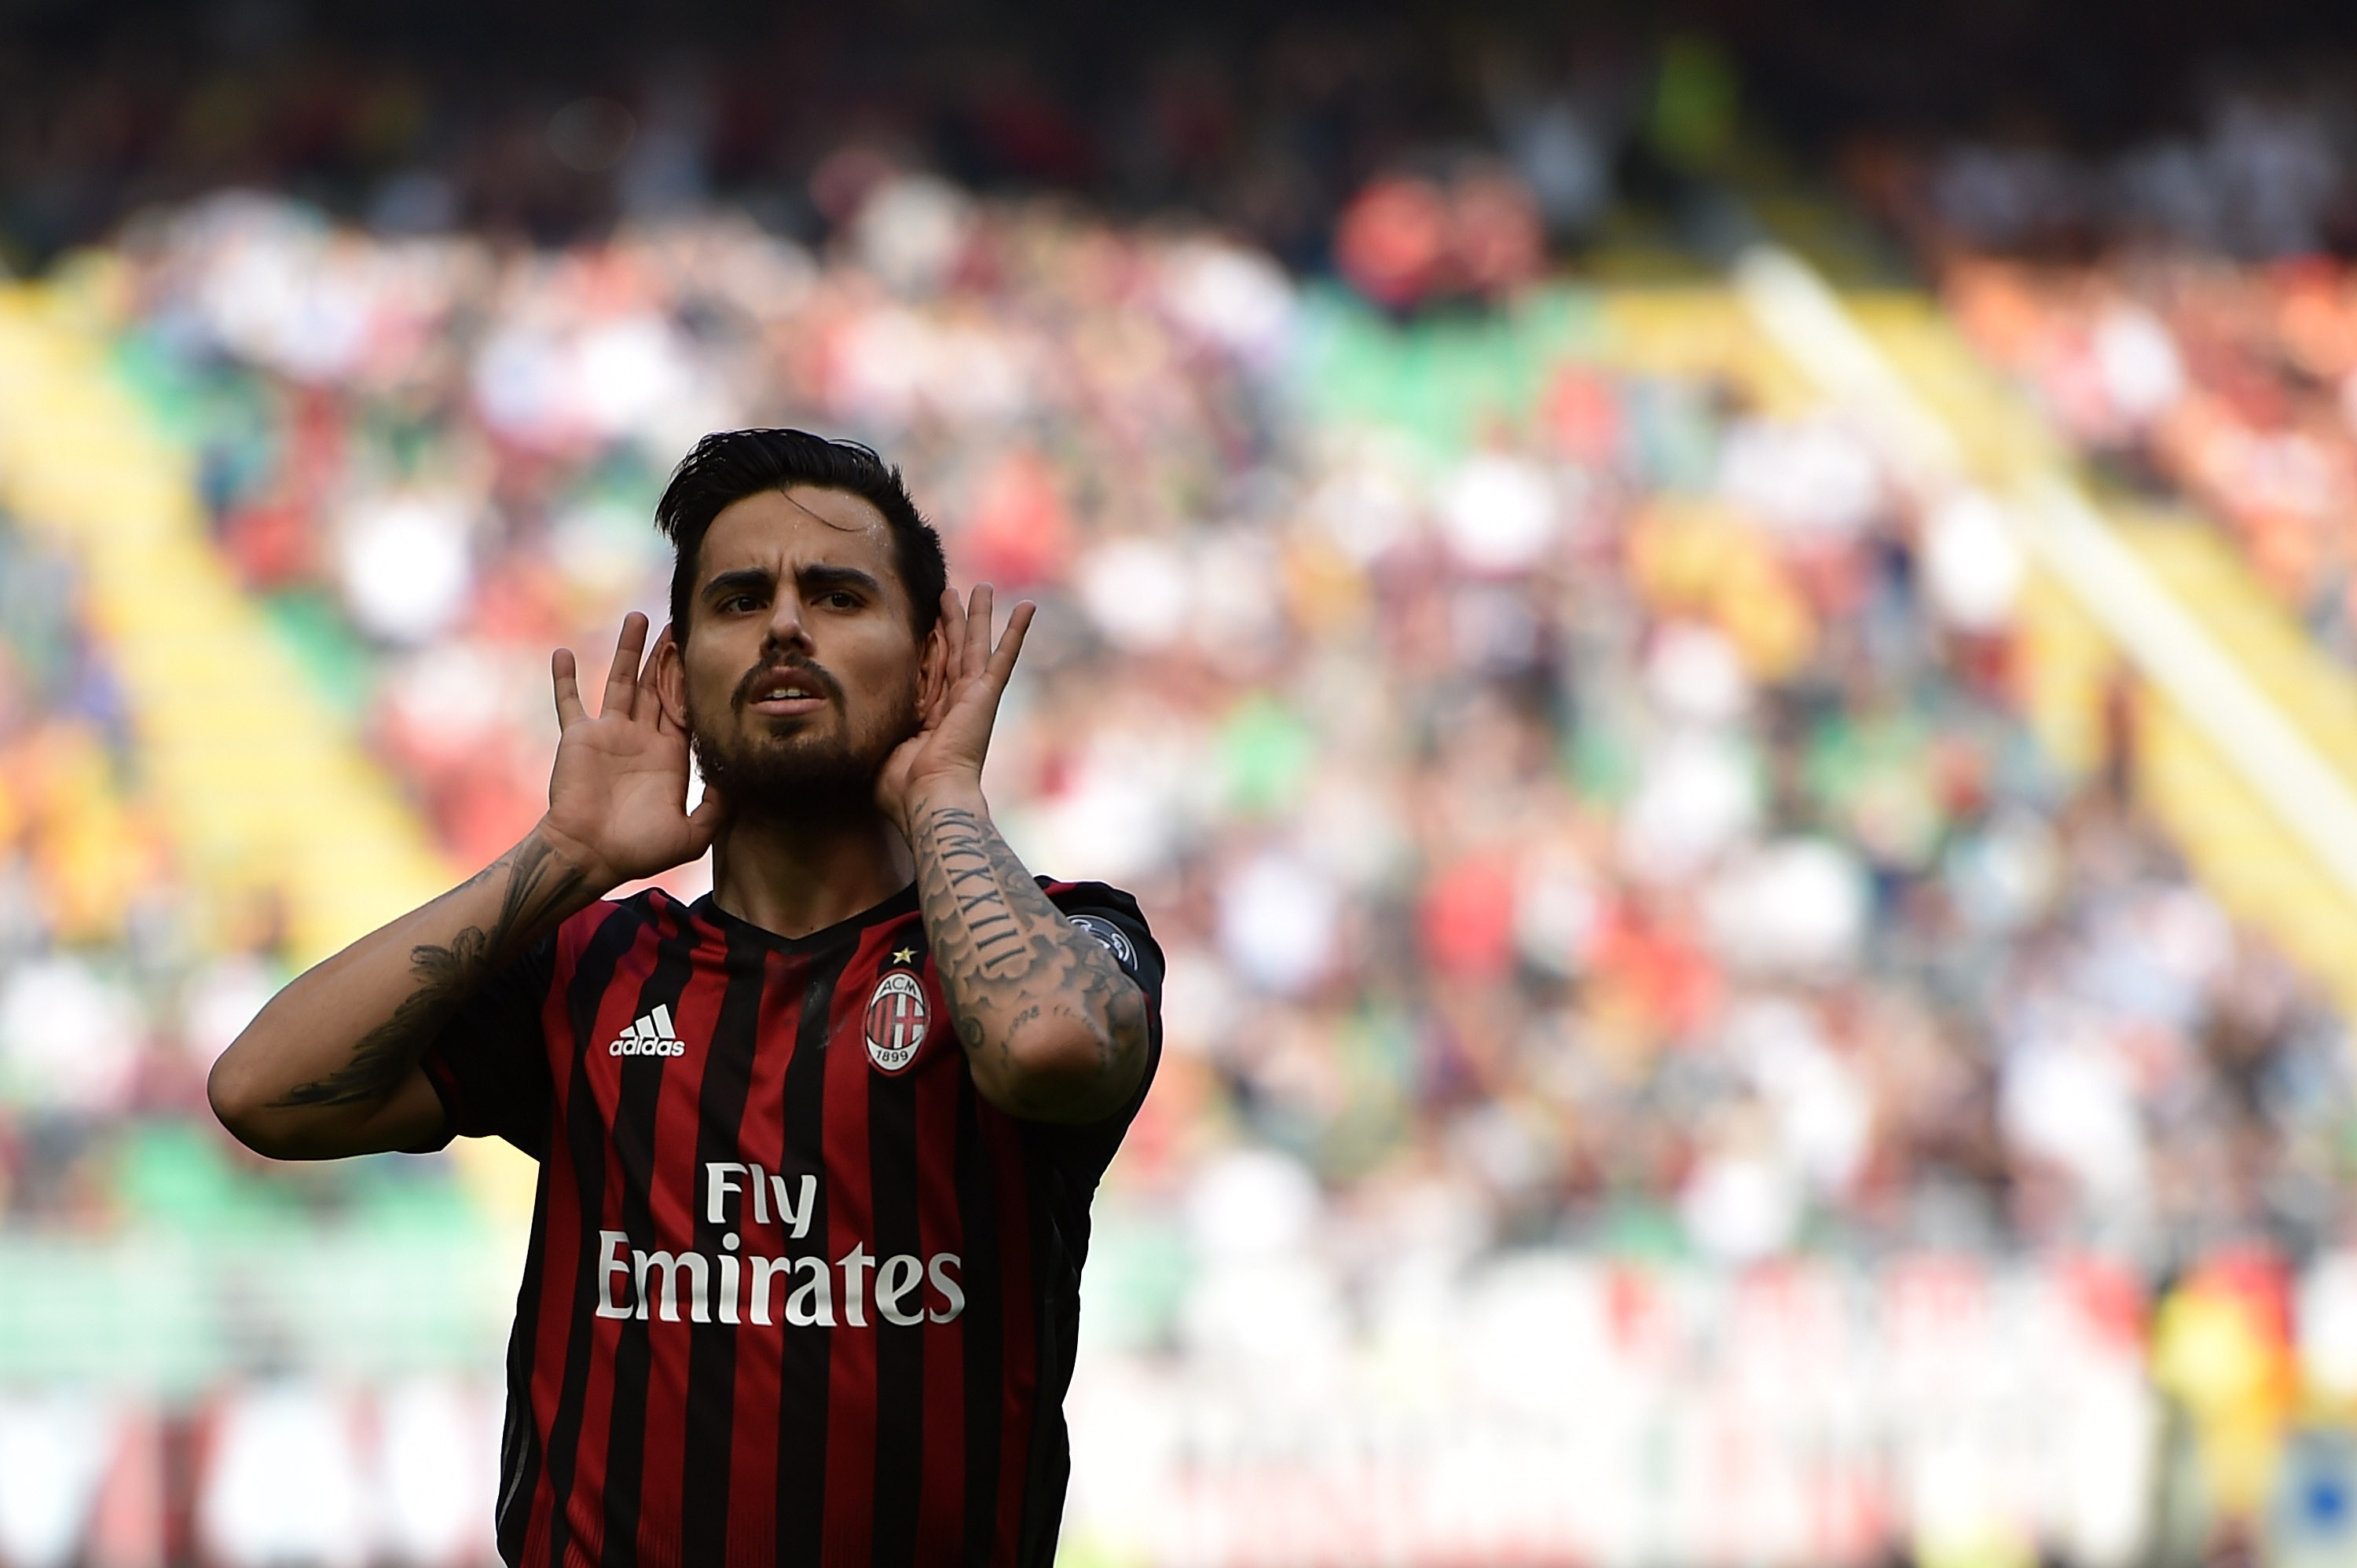 MILAN, ITALY - APRIL 09:  Suso of Milan celebrates after scoring the opening goal during the Serie A match between AC Milan and US Citta di Palermo at Stadio Giuseppe Meazza on April 9, 2017 in Milan, Italy.  (Photo by Tullio M. Puglia/Getty Images)